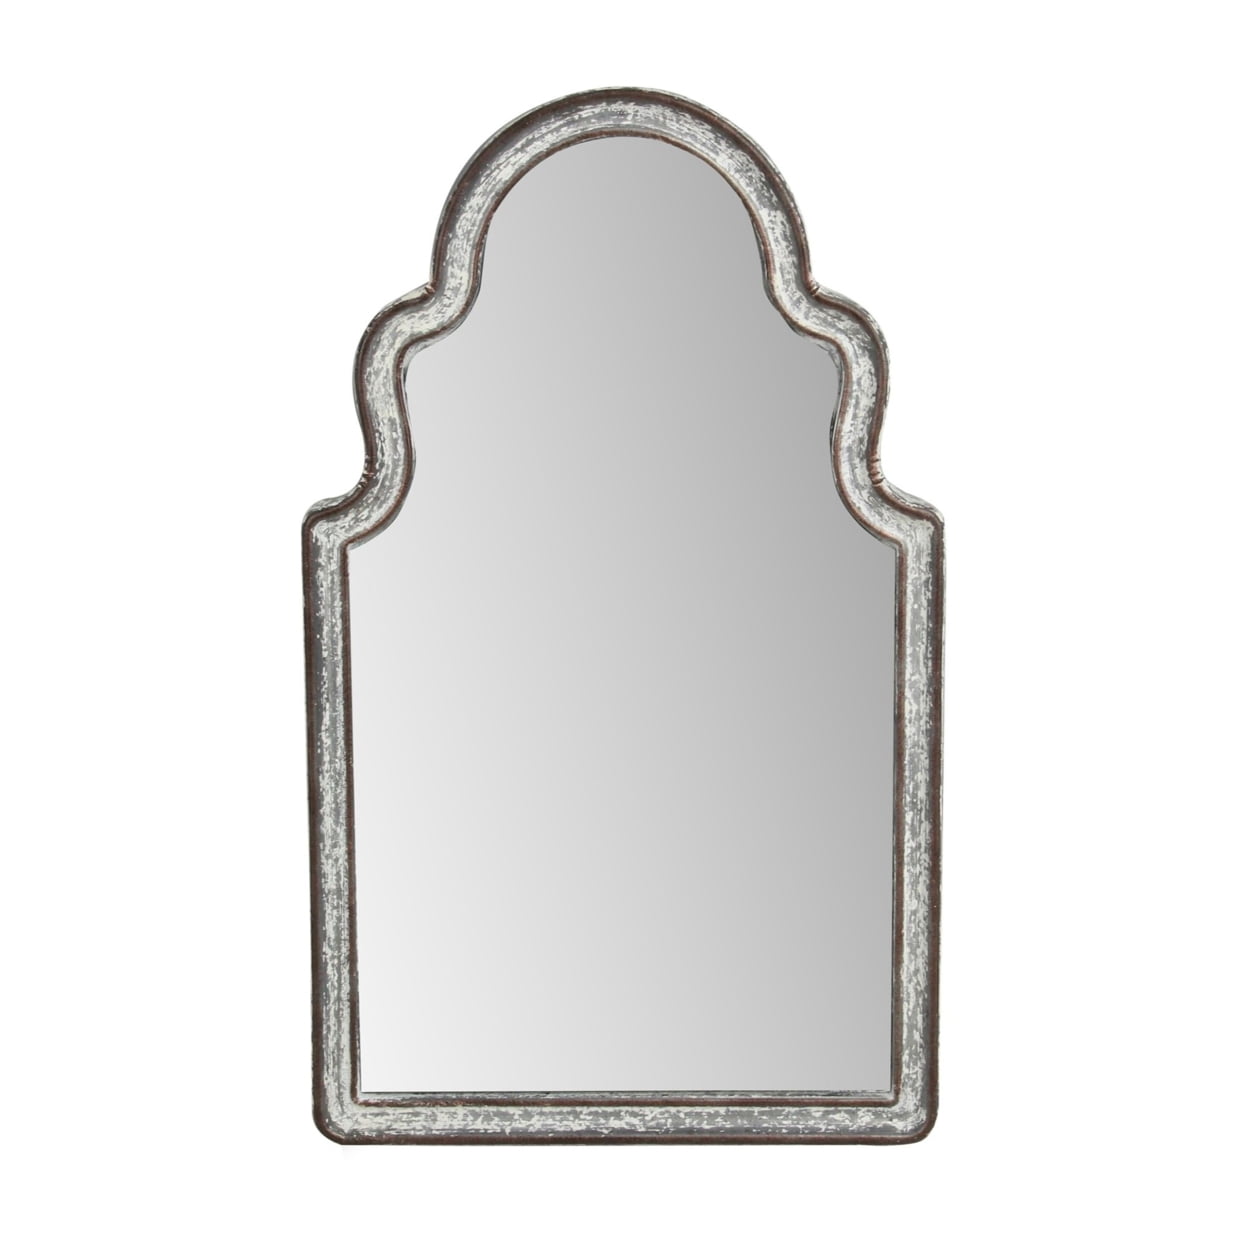 5348gr Mirror With An Elegant Top Curvature, Gray